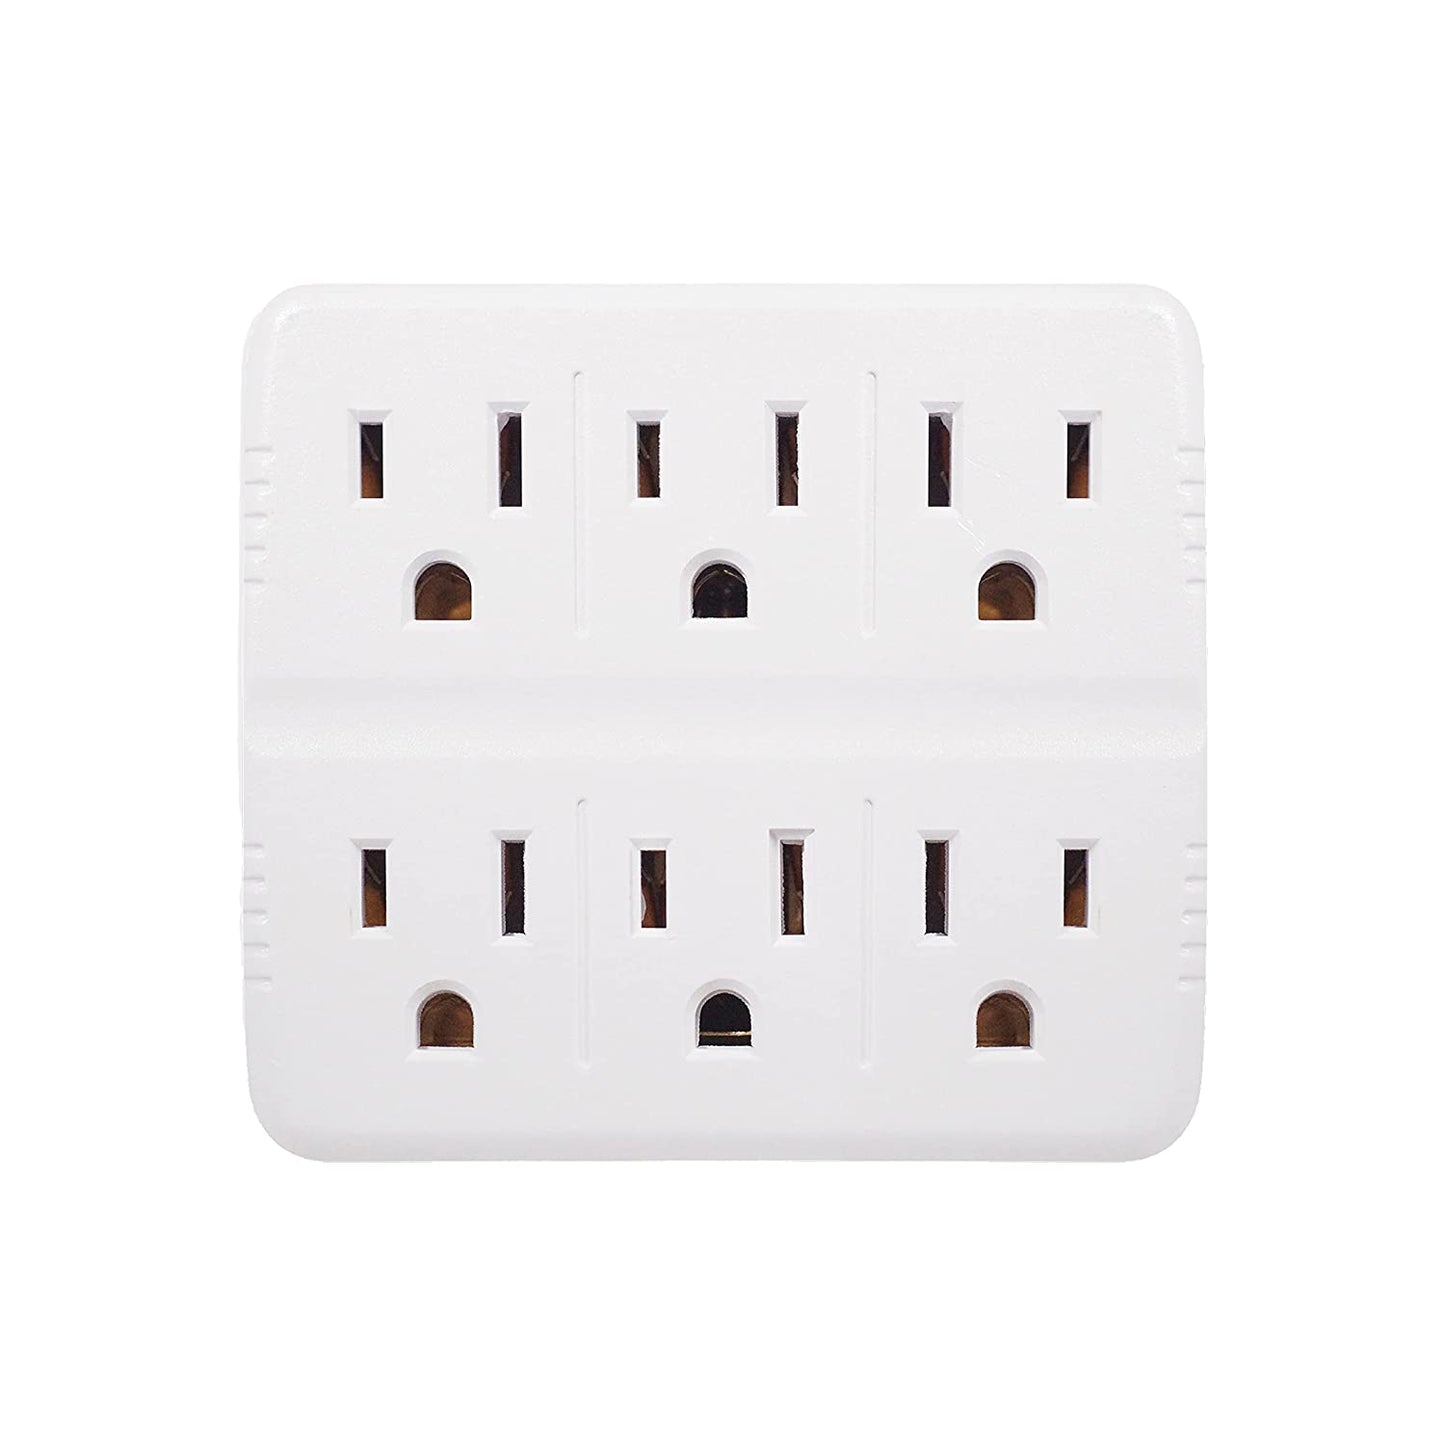 6 Outlet Wall Tap Adapter Multi Plug AC Power Splitter Electrical Socket US Outlet